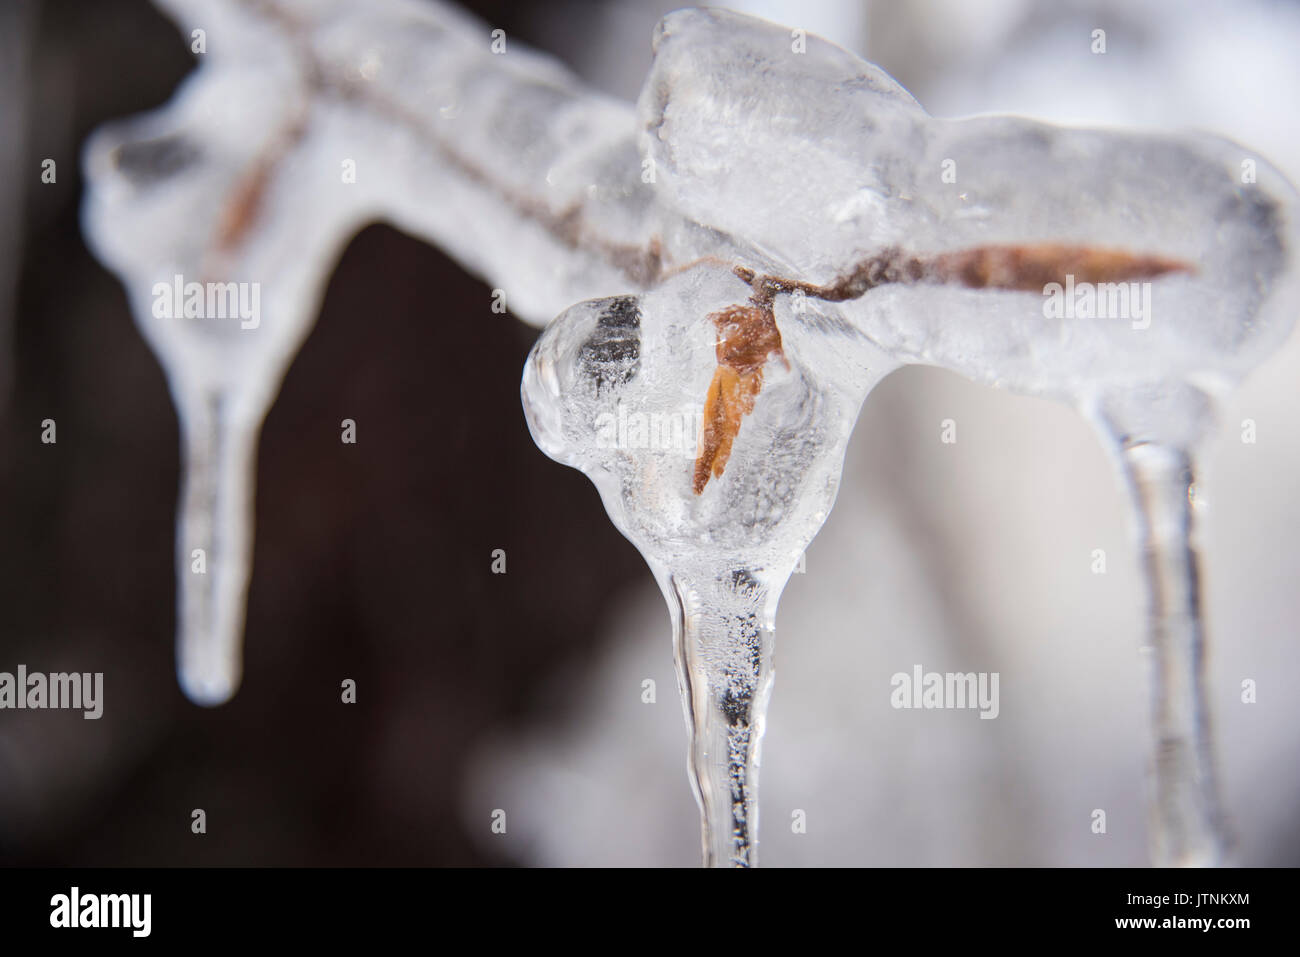 A team of researchers replicating an ice storm during winter in the White Mountains of New Hampshire. The team is studying the effects of ice storms on soil, trees, birds and insects. Stock Photo